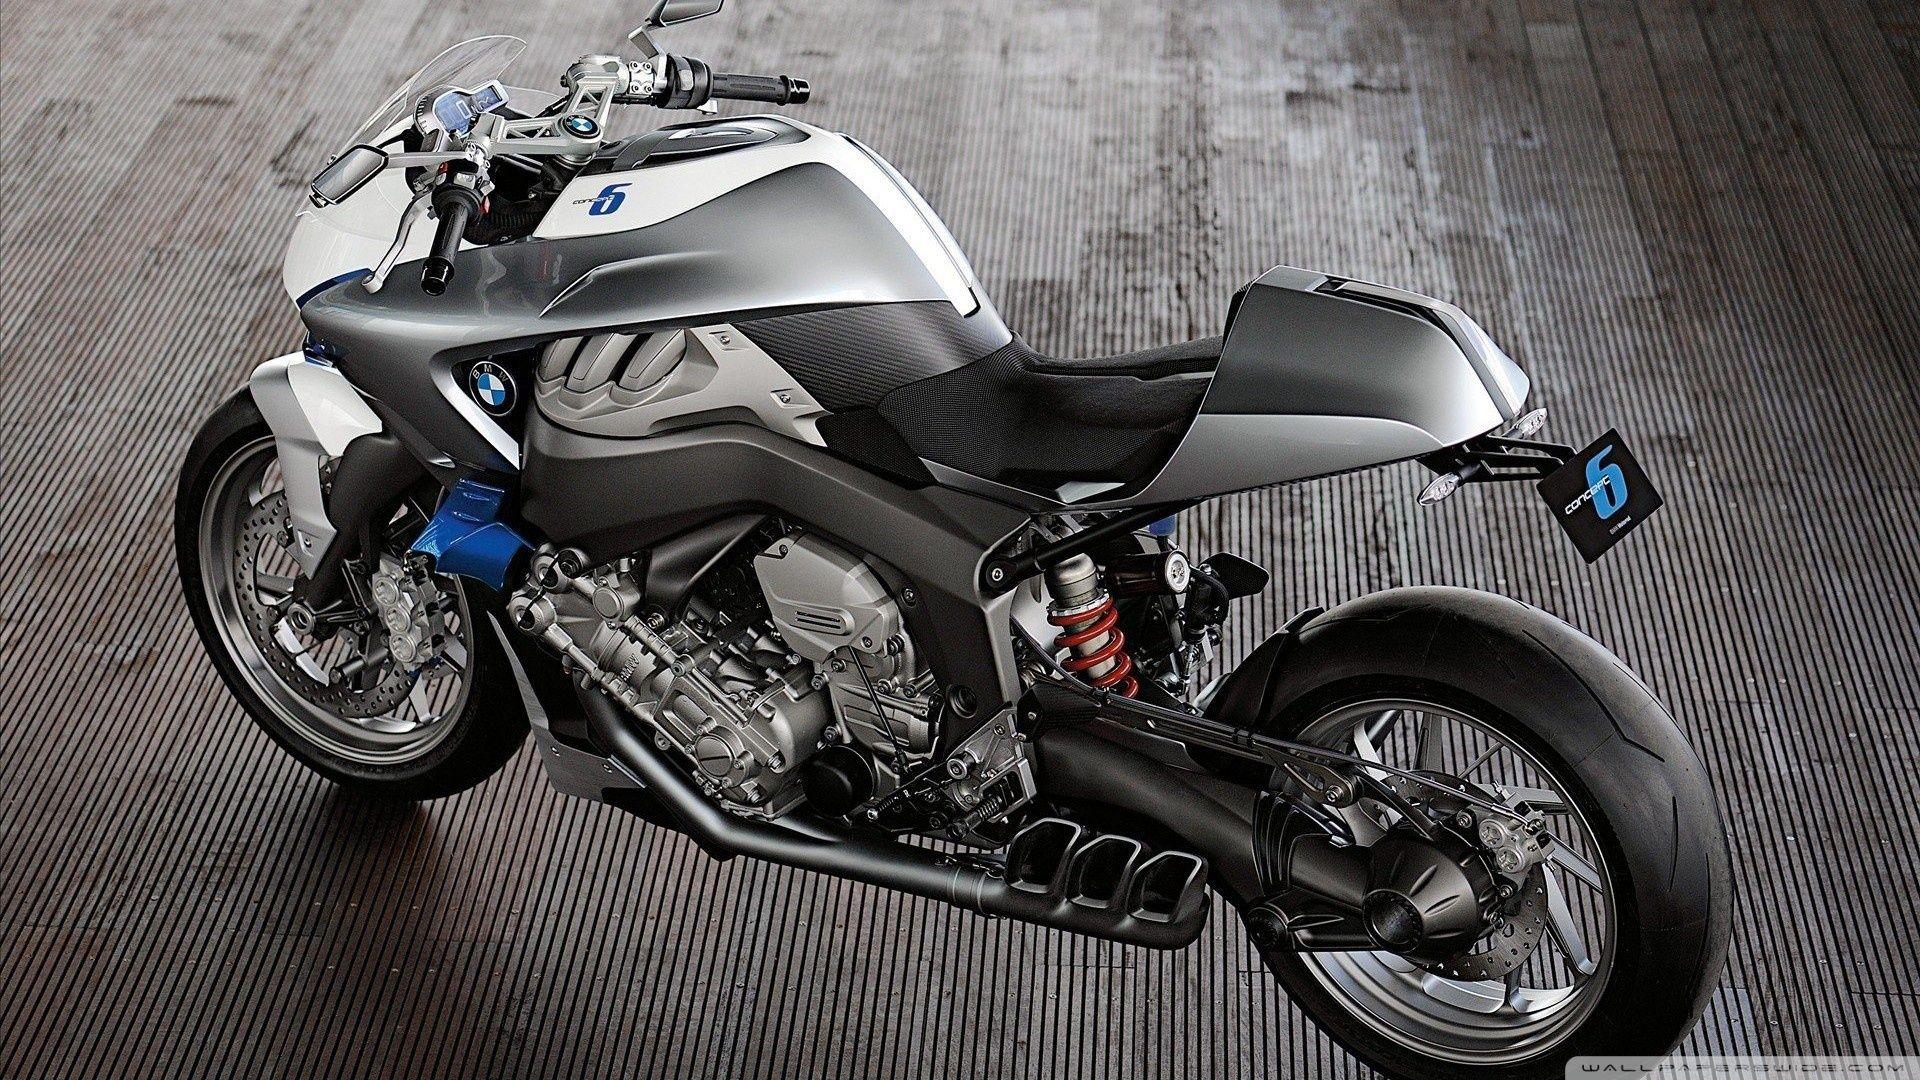 BMW Motorcycle Wallpapers - Wallpaper Cave